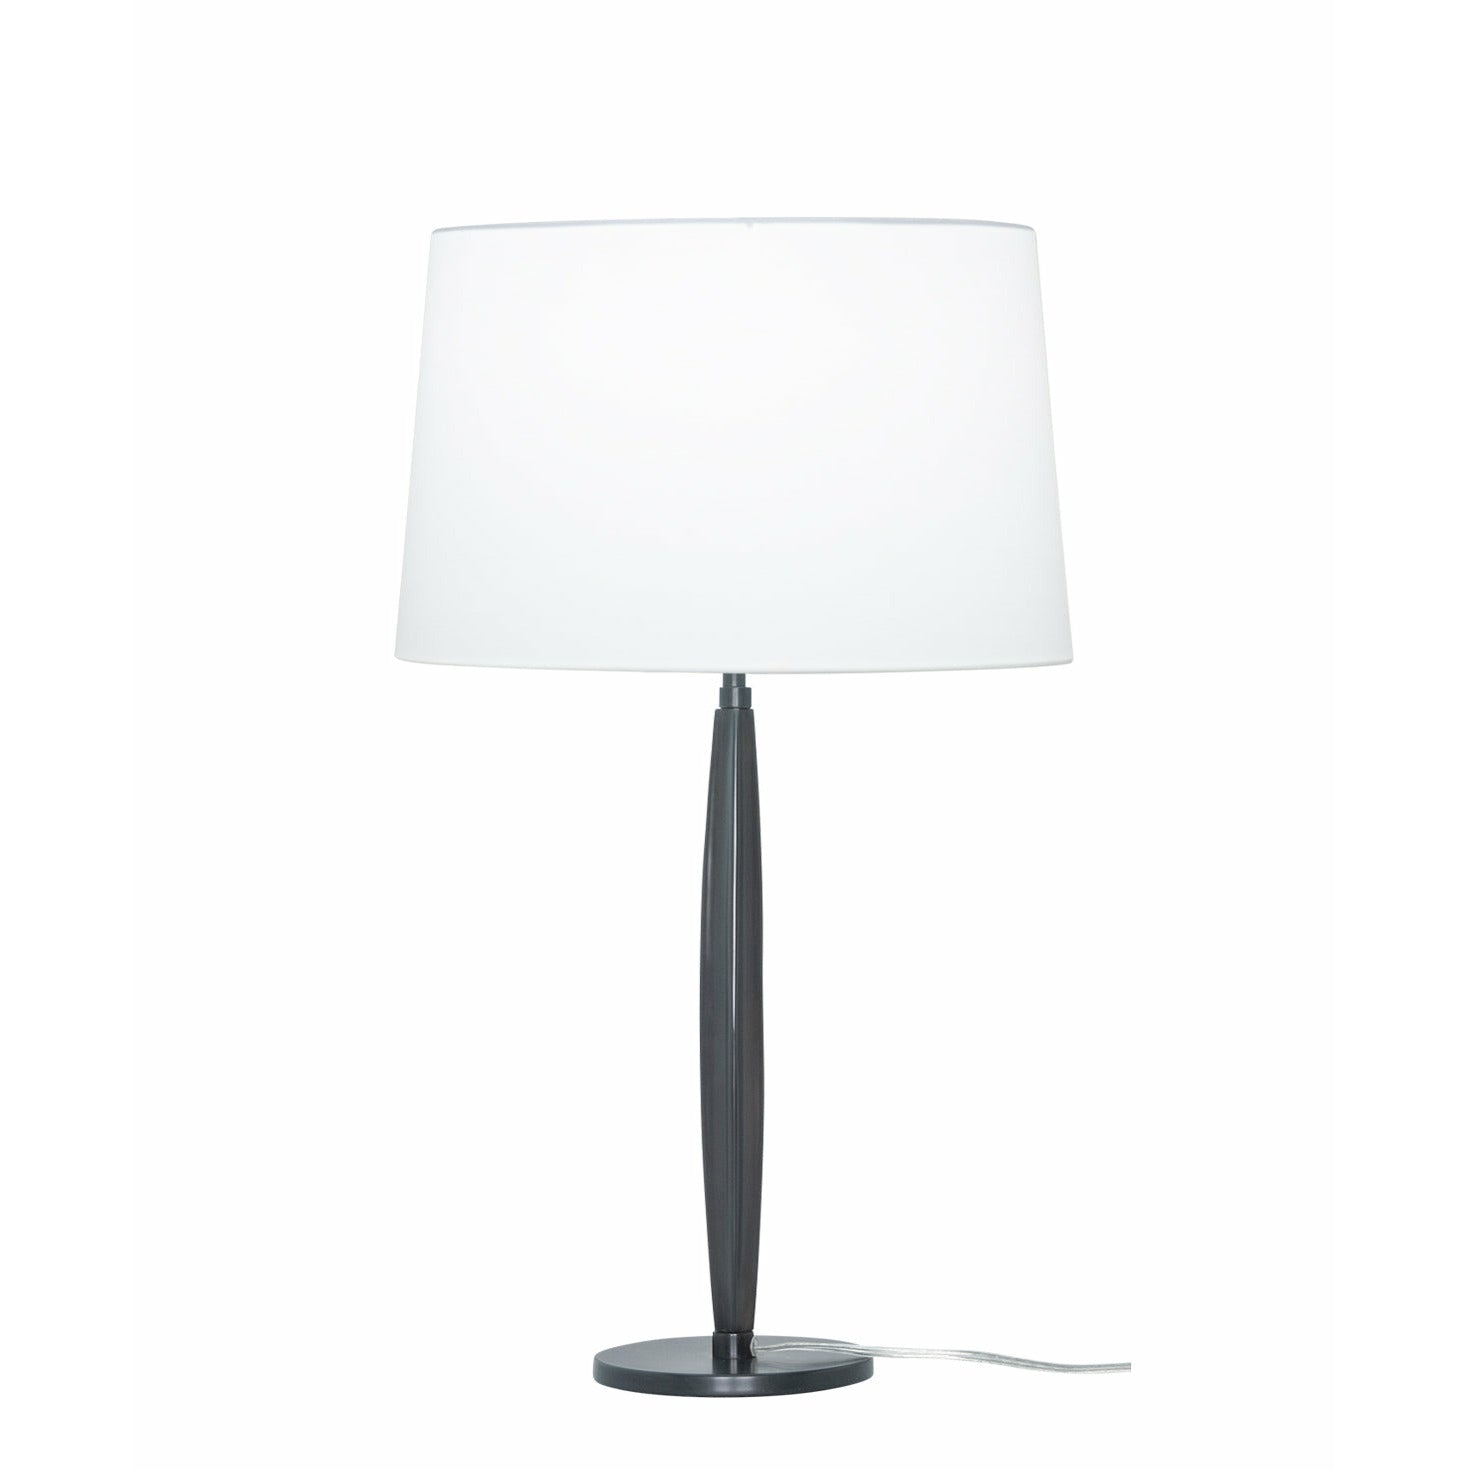 Widel Table Lamp